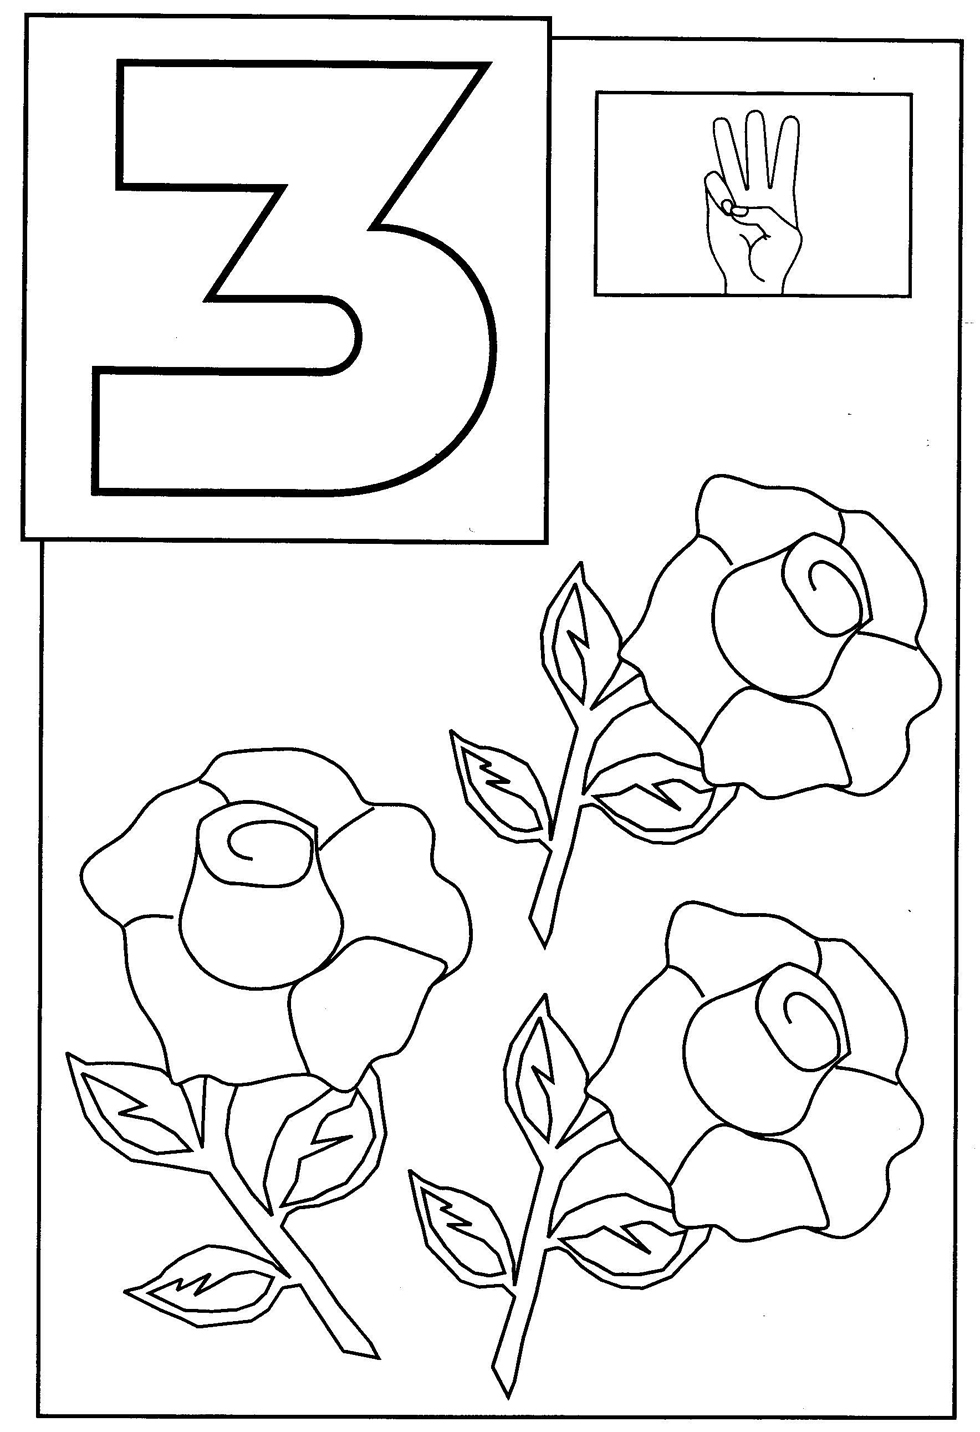 Number Coloring Pages For Toddlers At GetDrawings Free Download